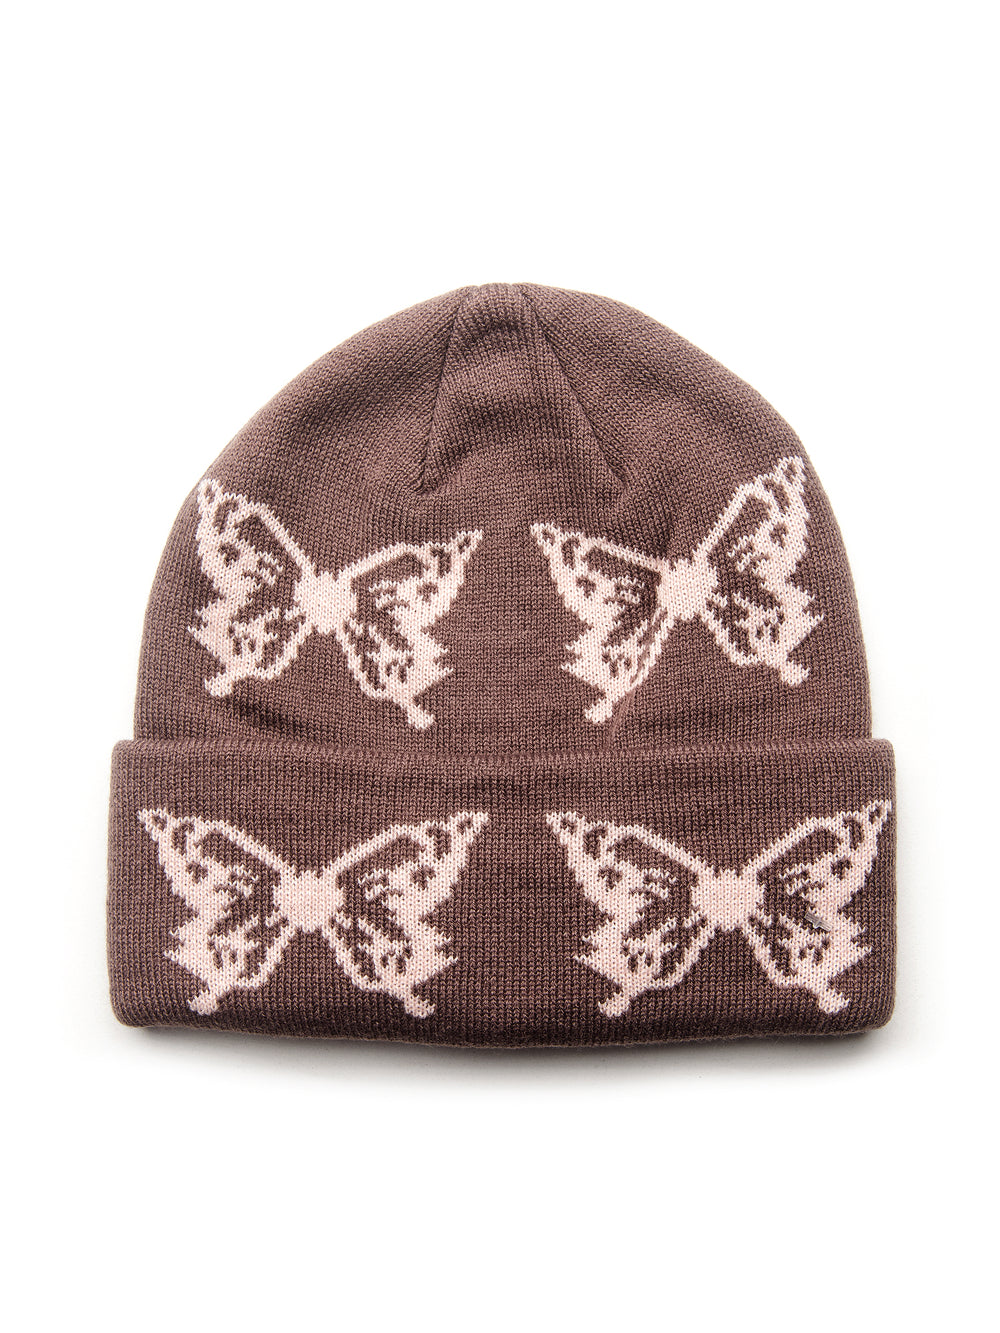 HARLOW JACQUARD BEANIE - BUTTERFLY